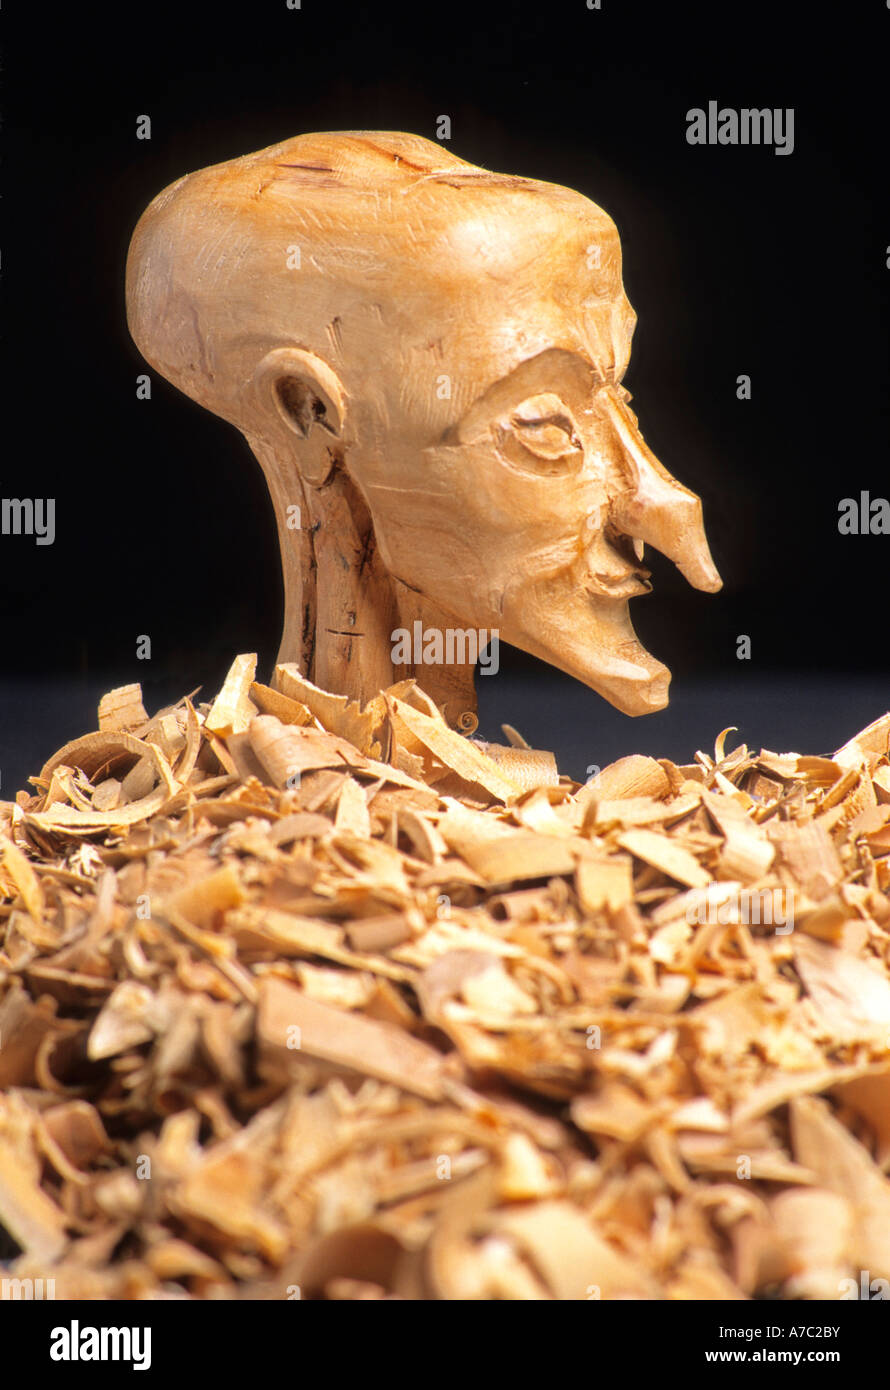 Head of a wood puppet Stock Photo